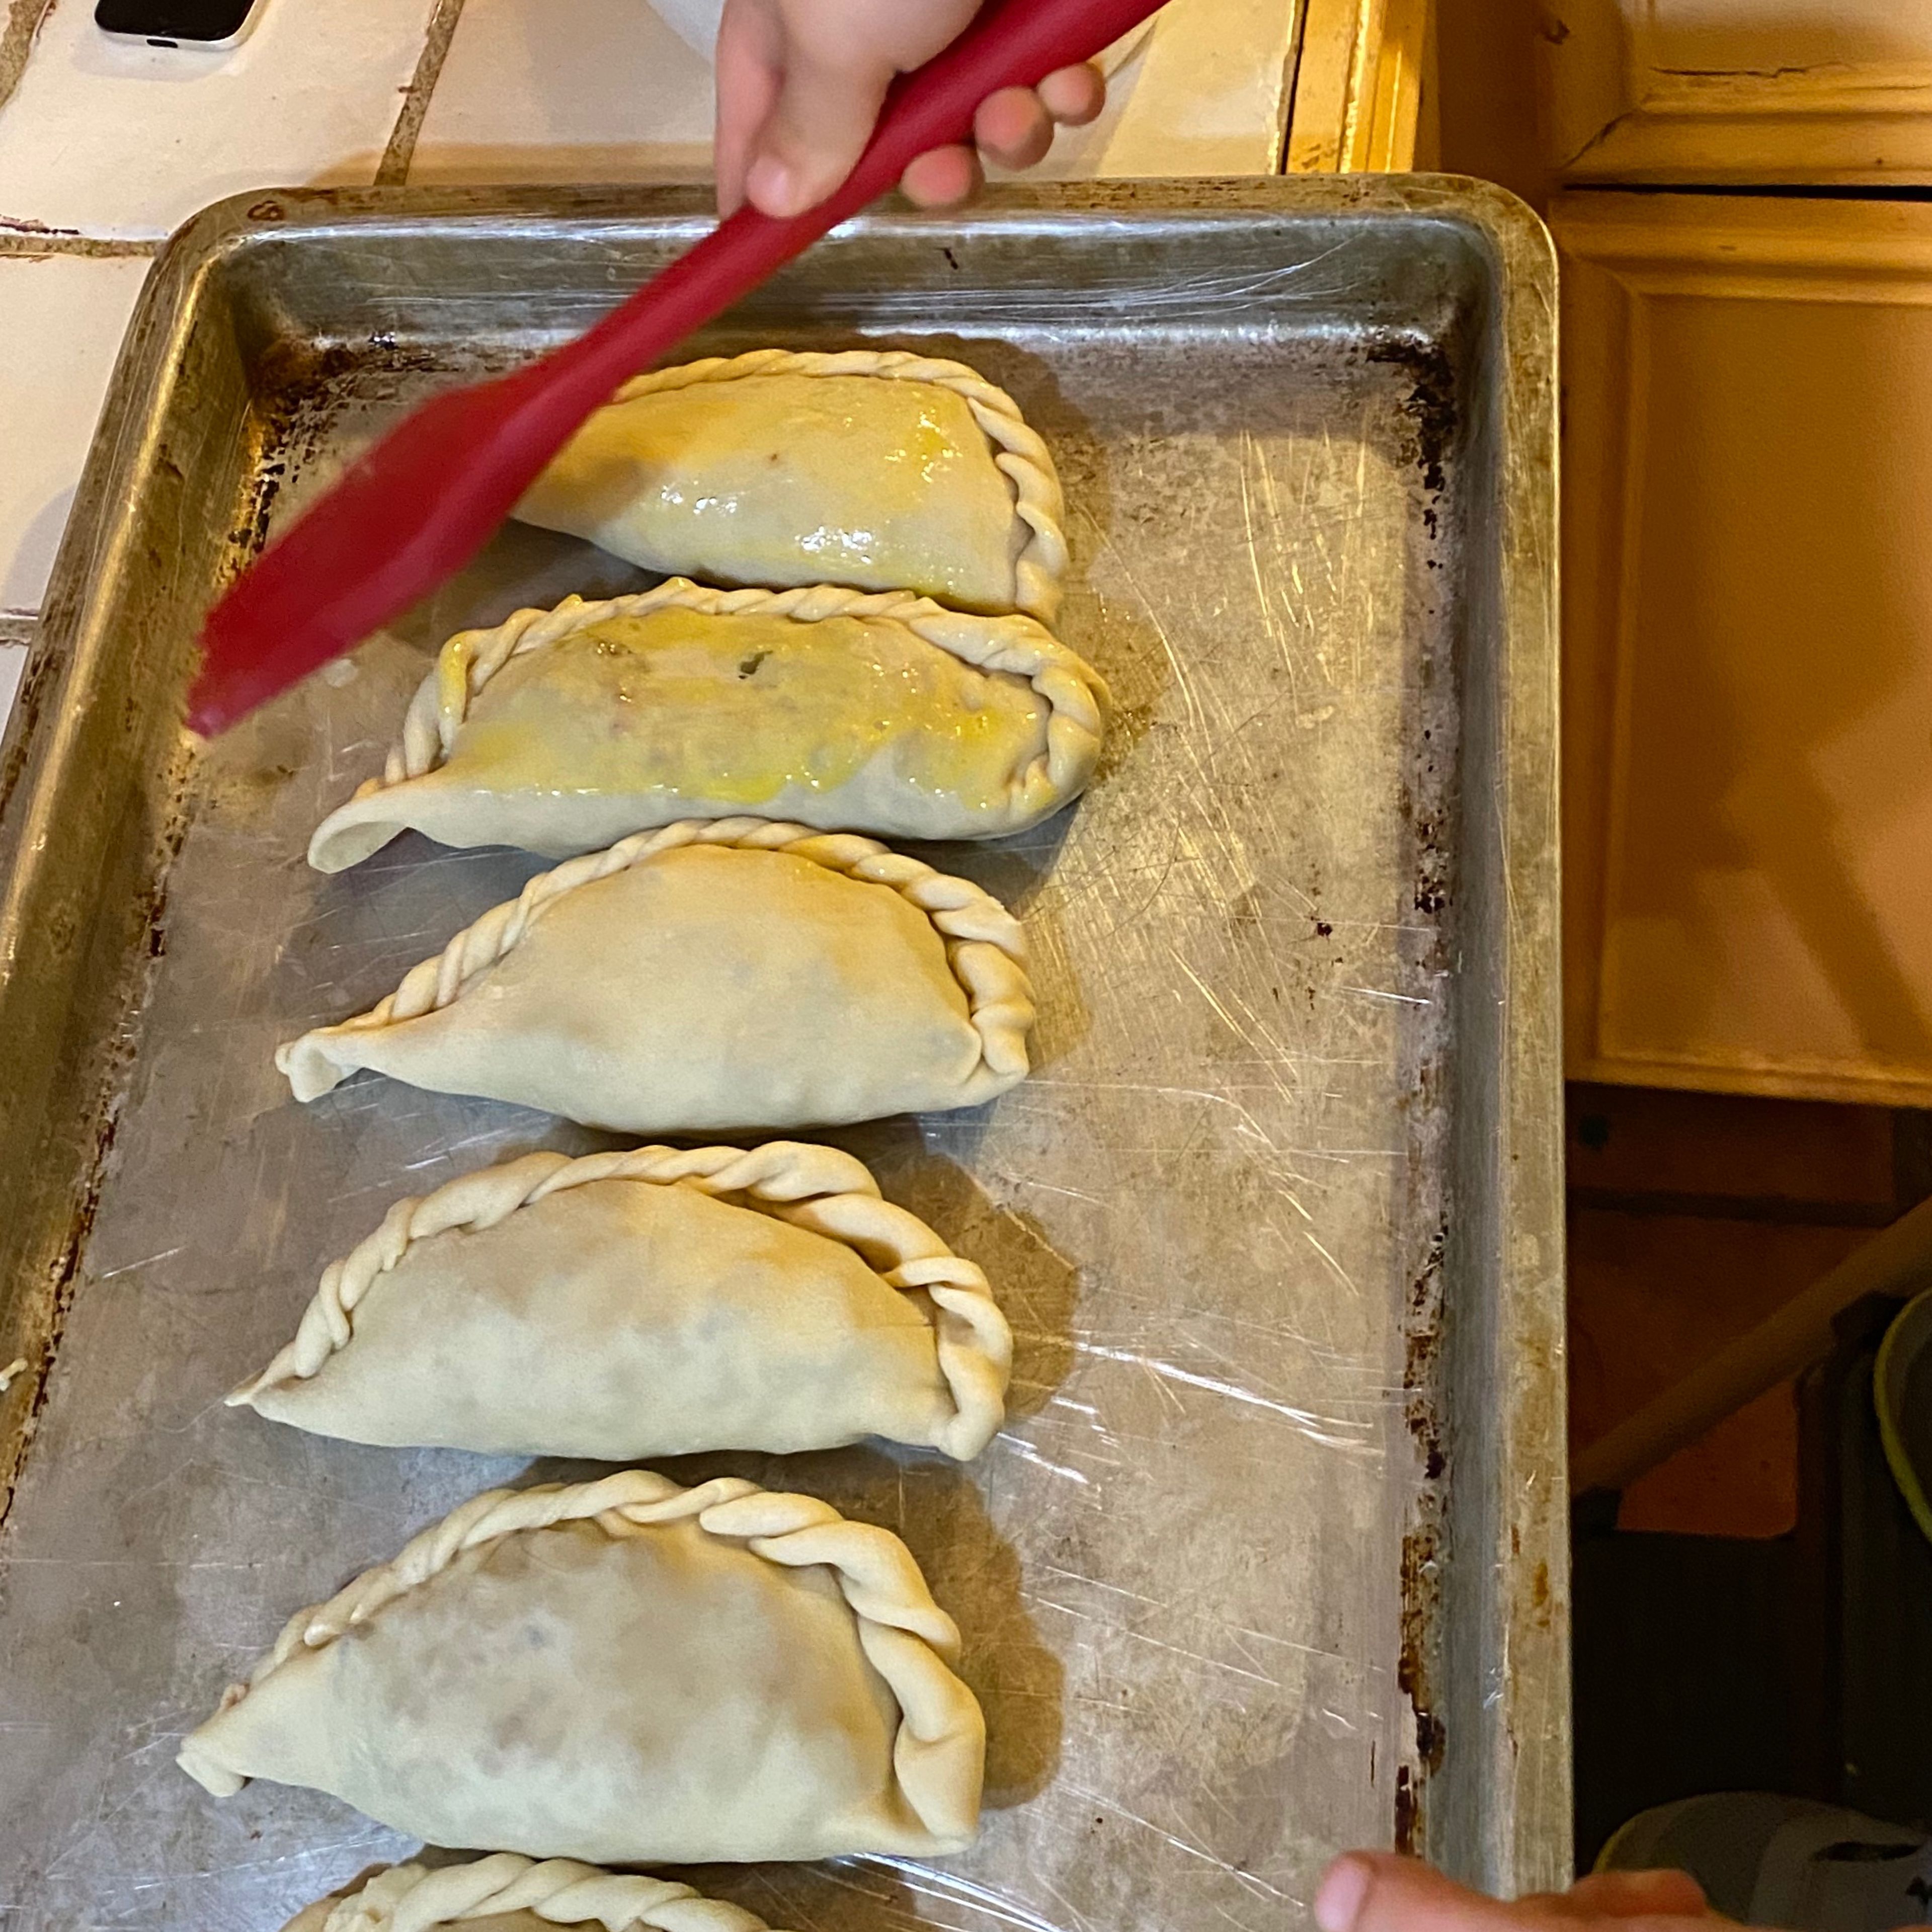 Place the empanadas 1 inch apart on a baking sheet sprayed with cooking spray. Place in the fridge for 30 minutes.